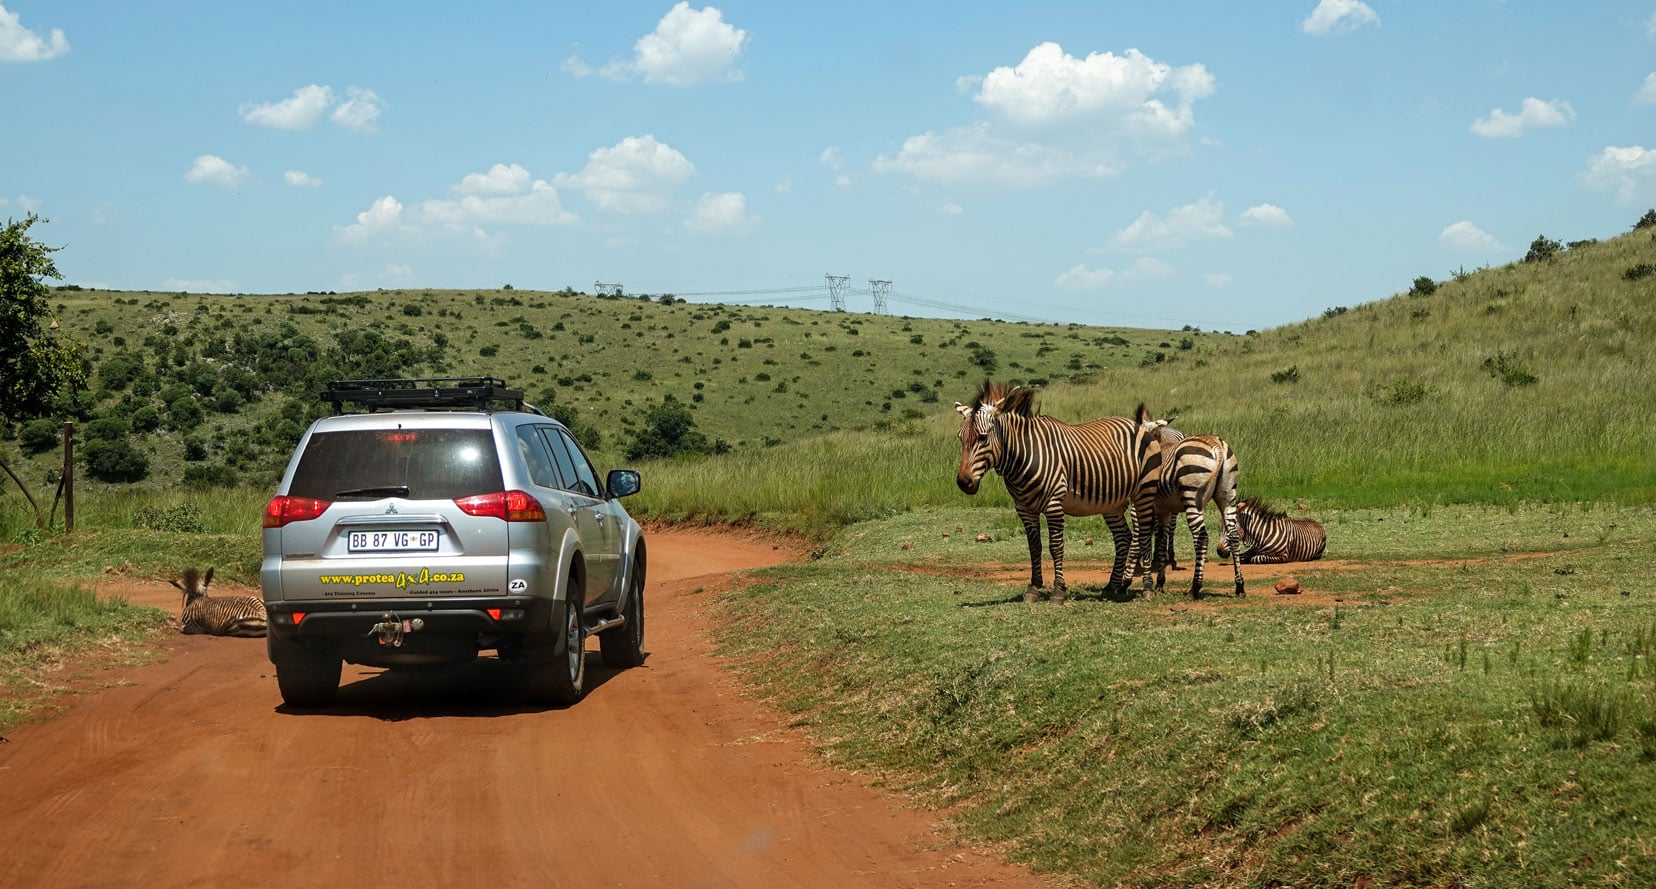 Zebra on the road by car 